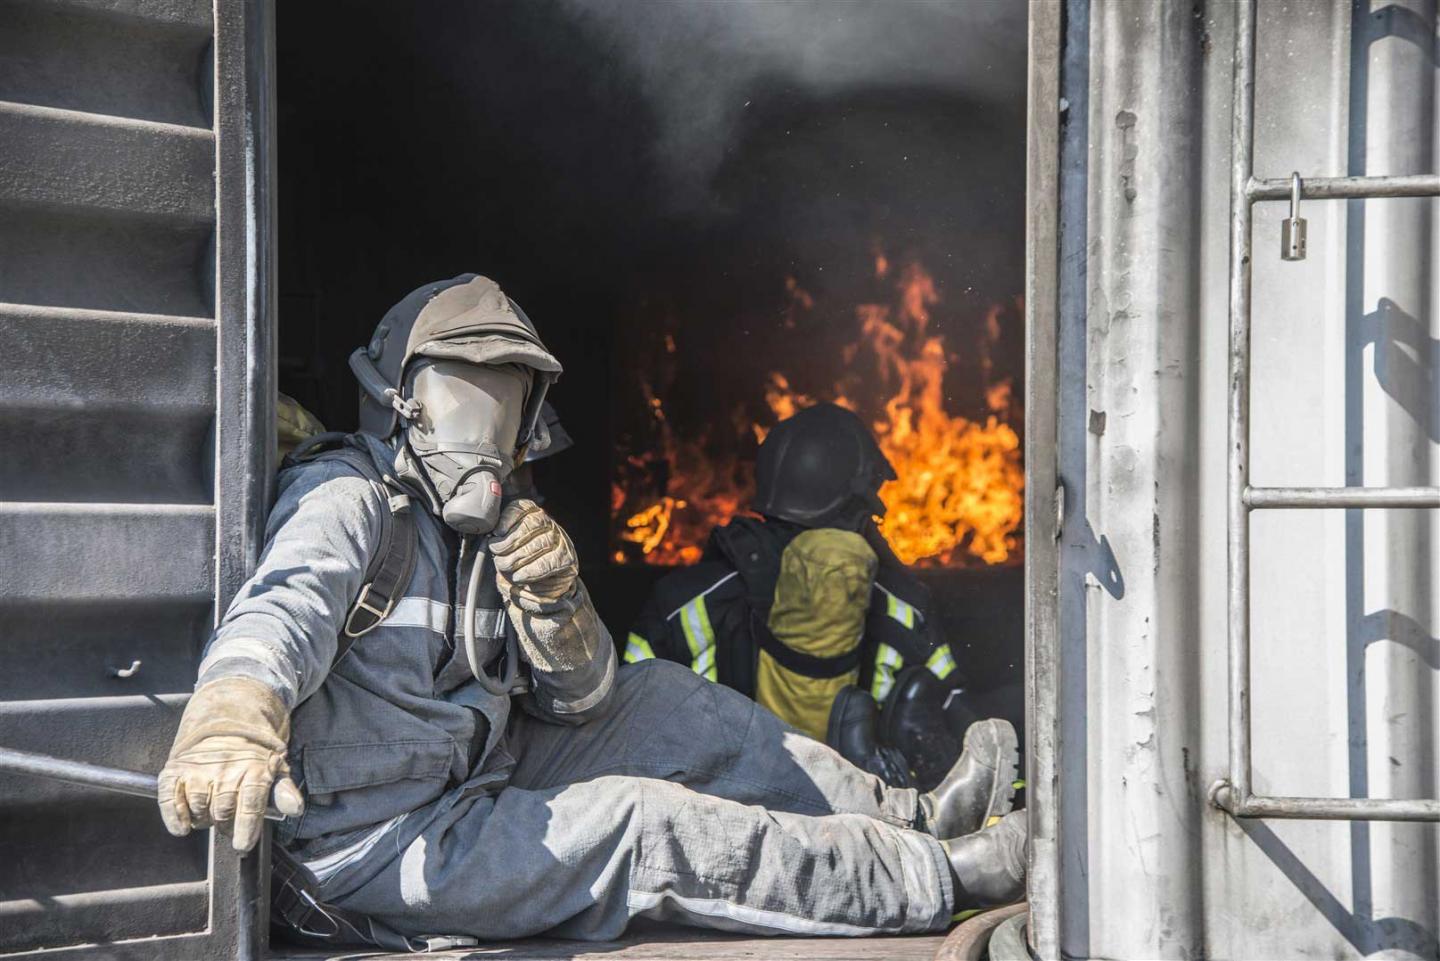 CERN firefighters train in the hot seat